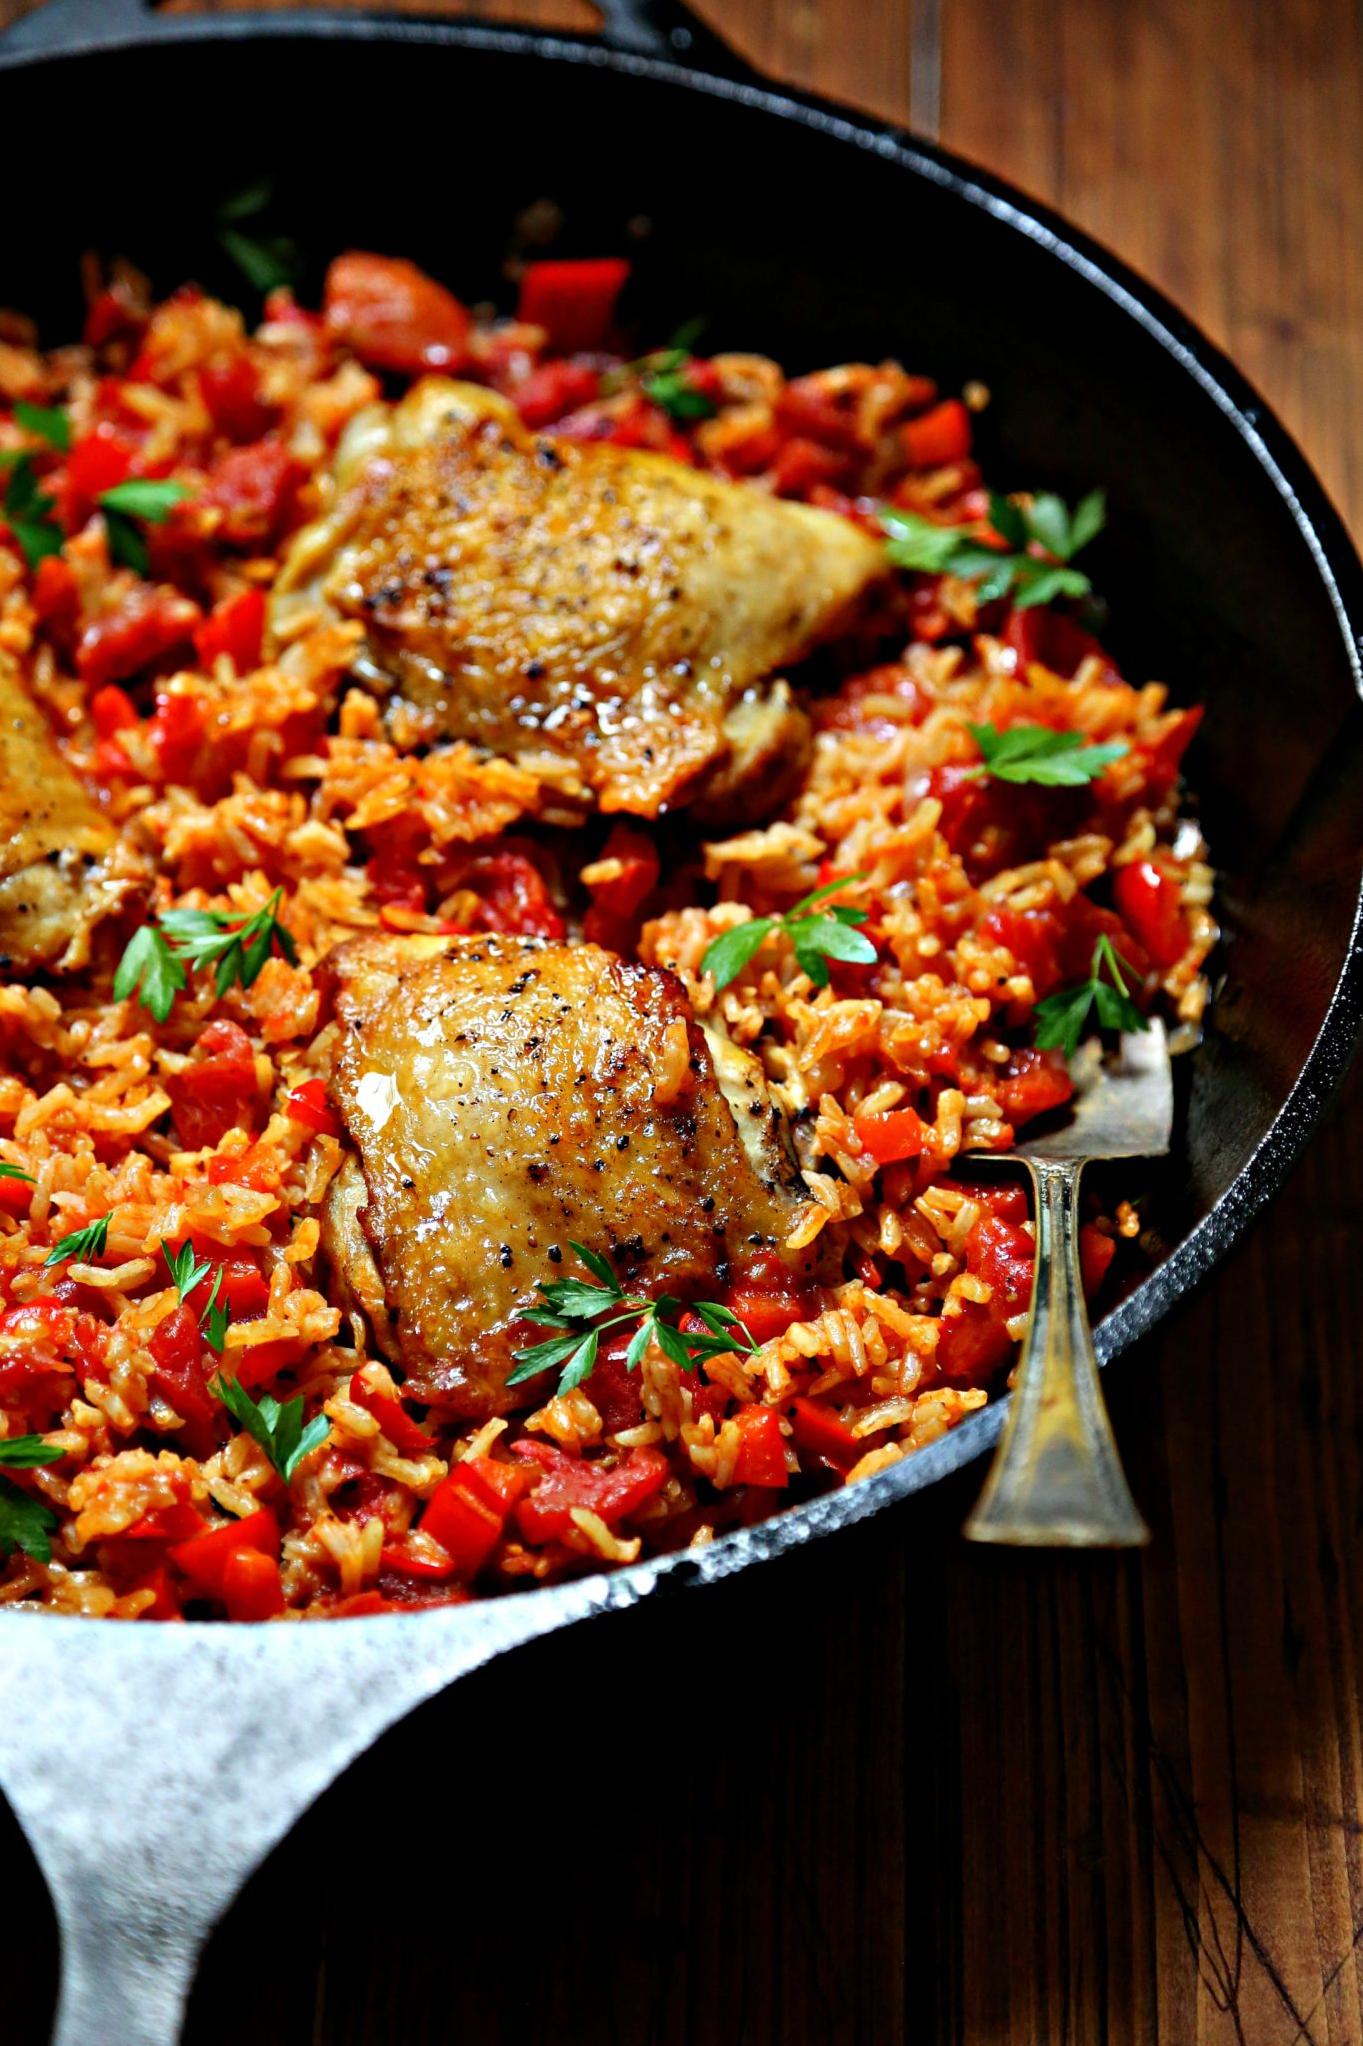  Don't be chicken to try this flavorful and hearty recipe.